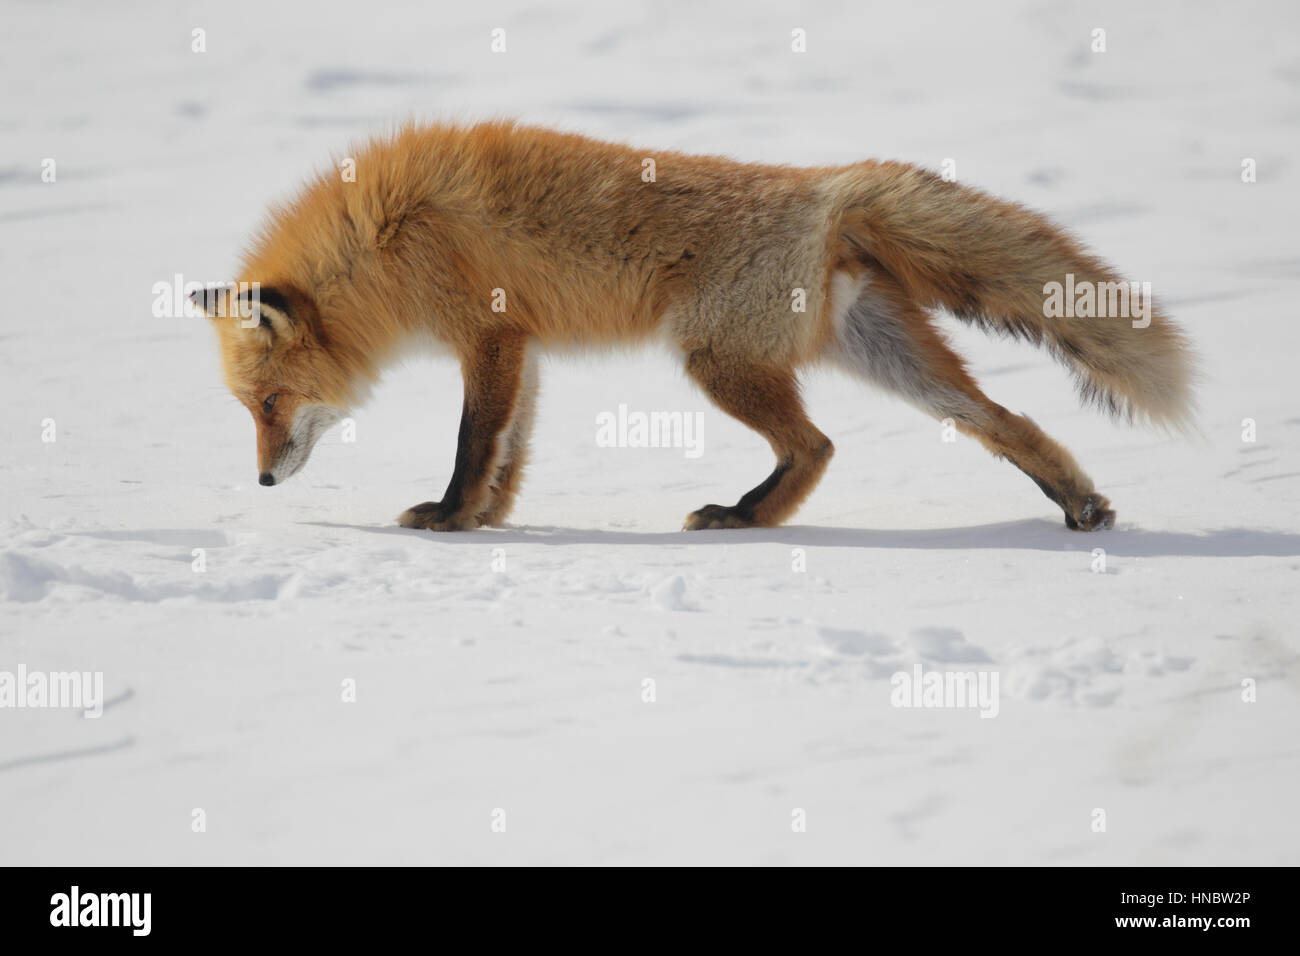 Hokkaido Red Fox (Vulpes vulpes schrencki), a particularly furry subspecies of the widespread fox, against winter snow, on Hokkaido, Japan Stock Photo